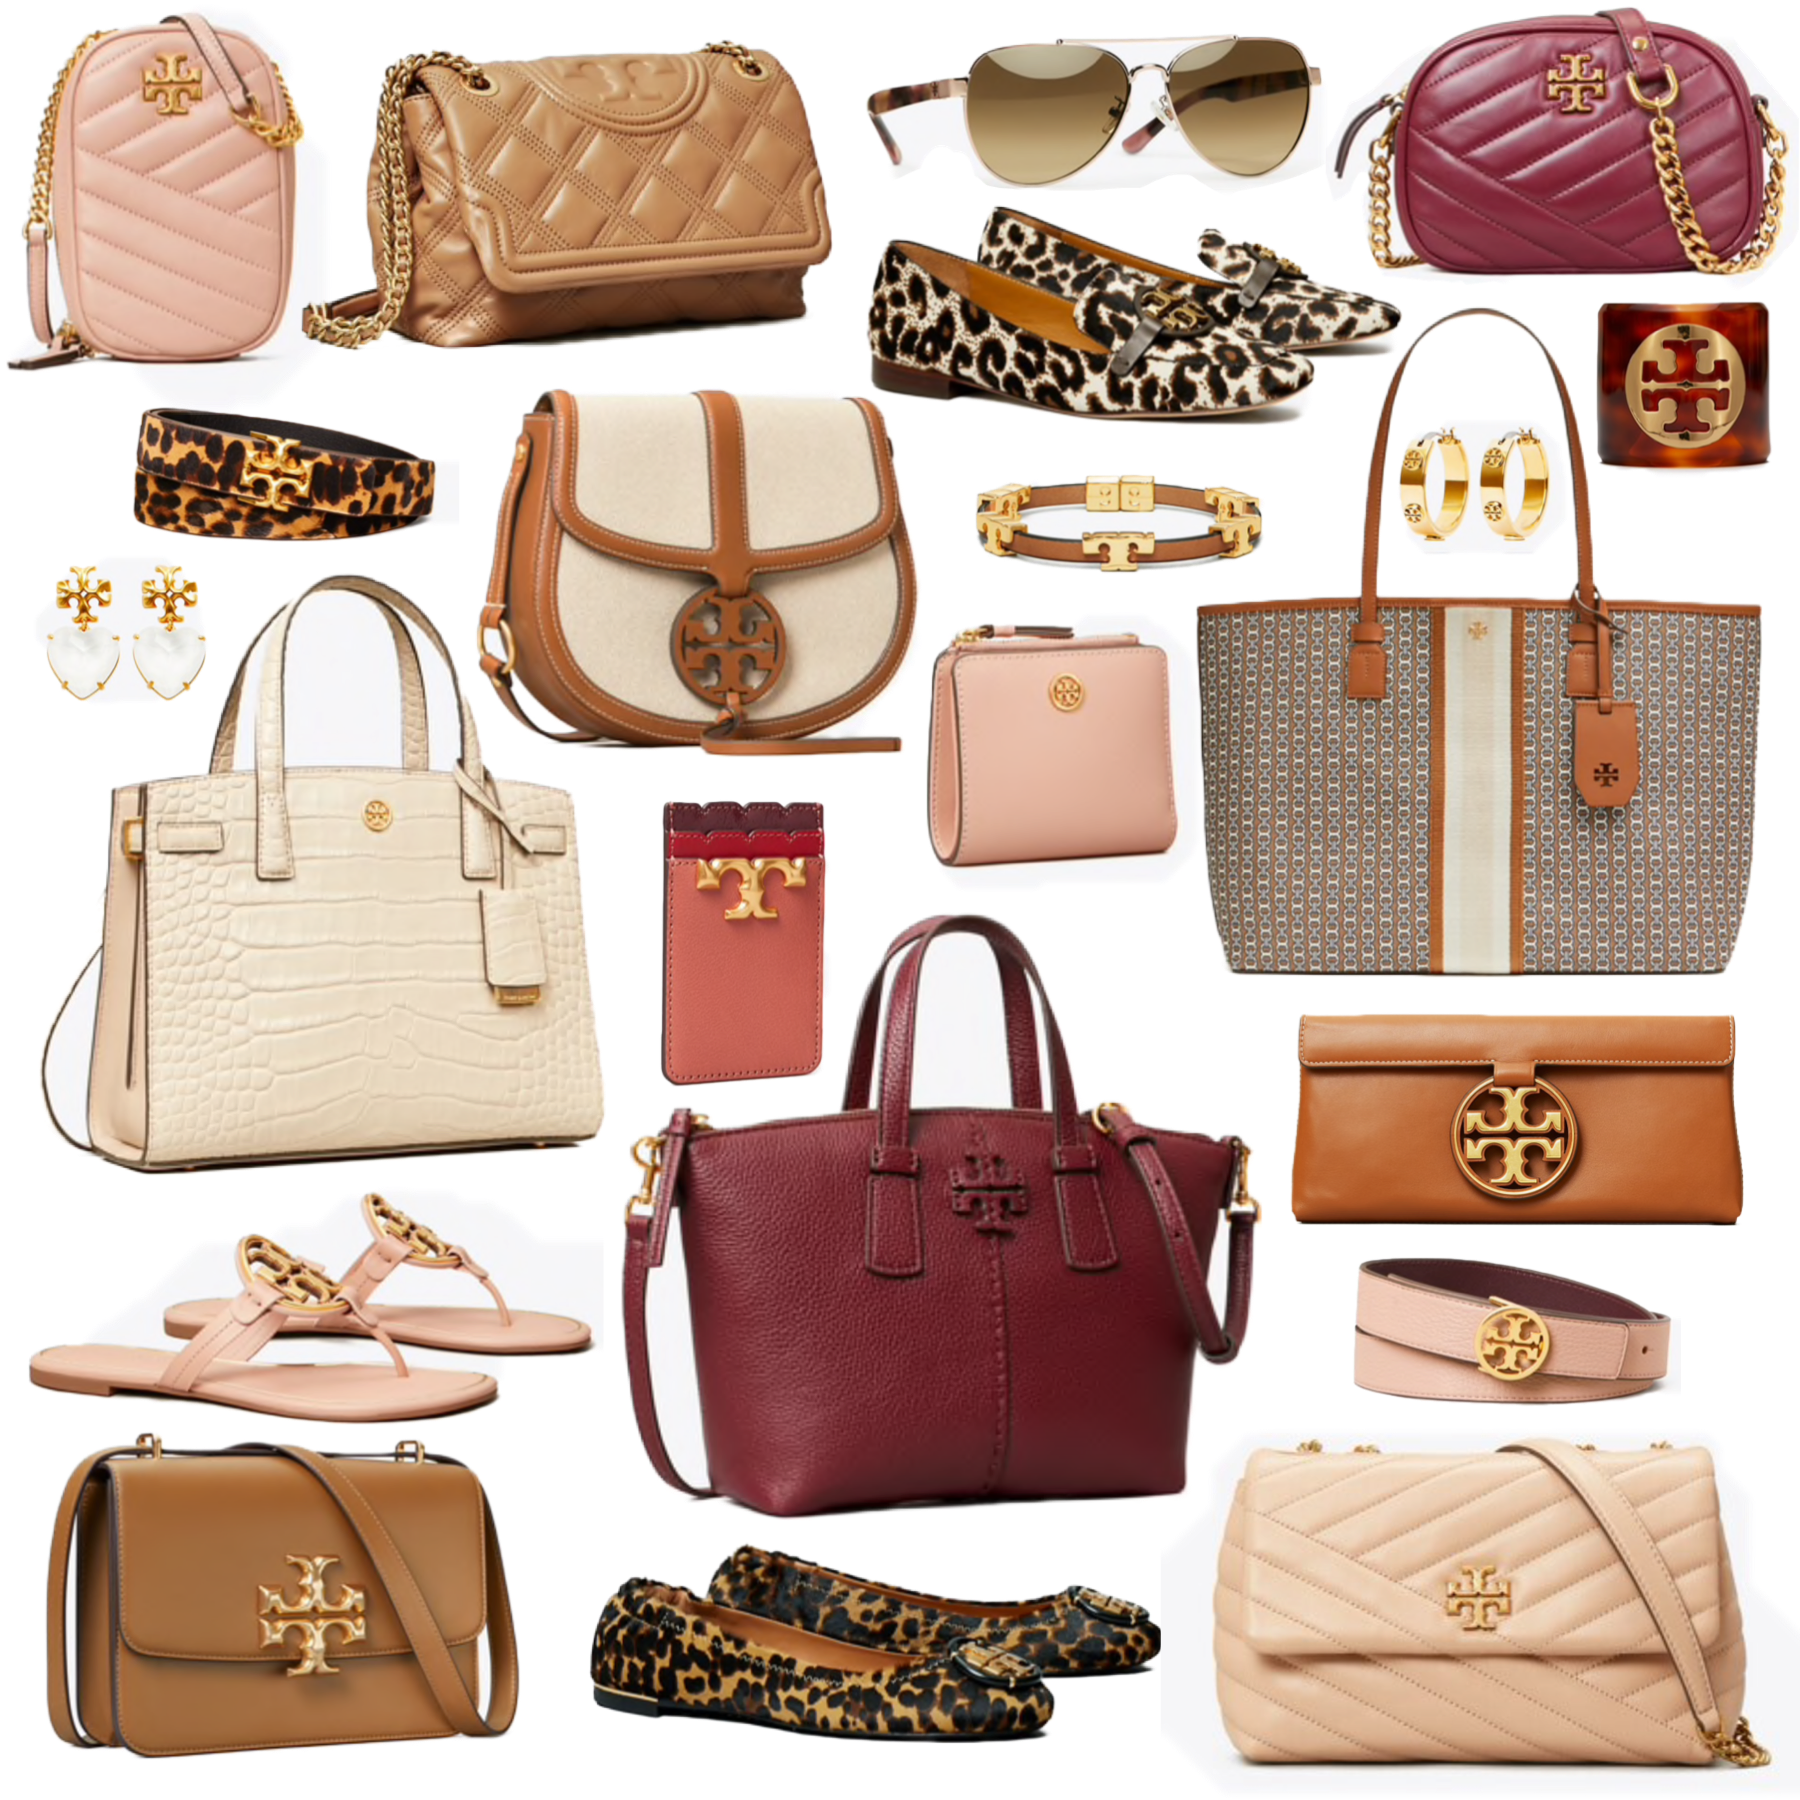 Tory Burch Fall Event 2020  Save Up To 30% Off + Free Shipping! - The  Double Take Girls